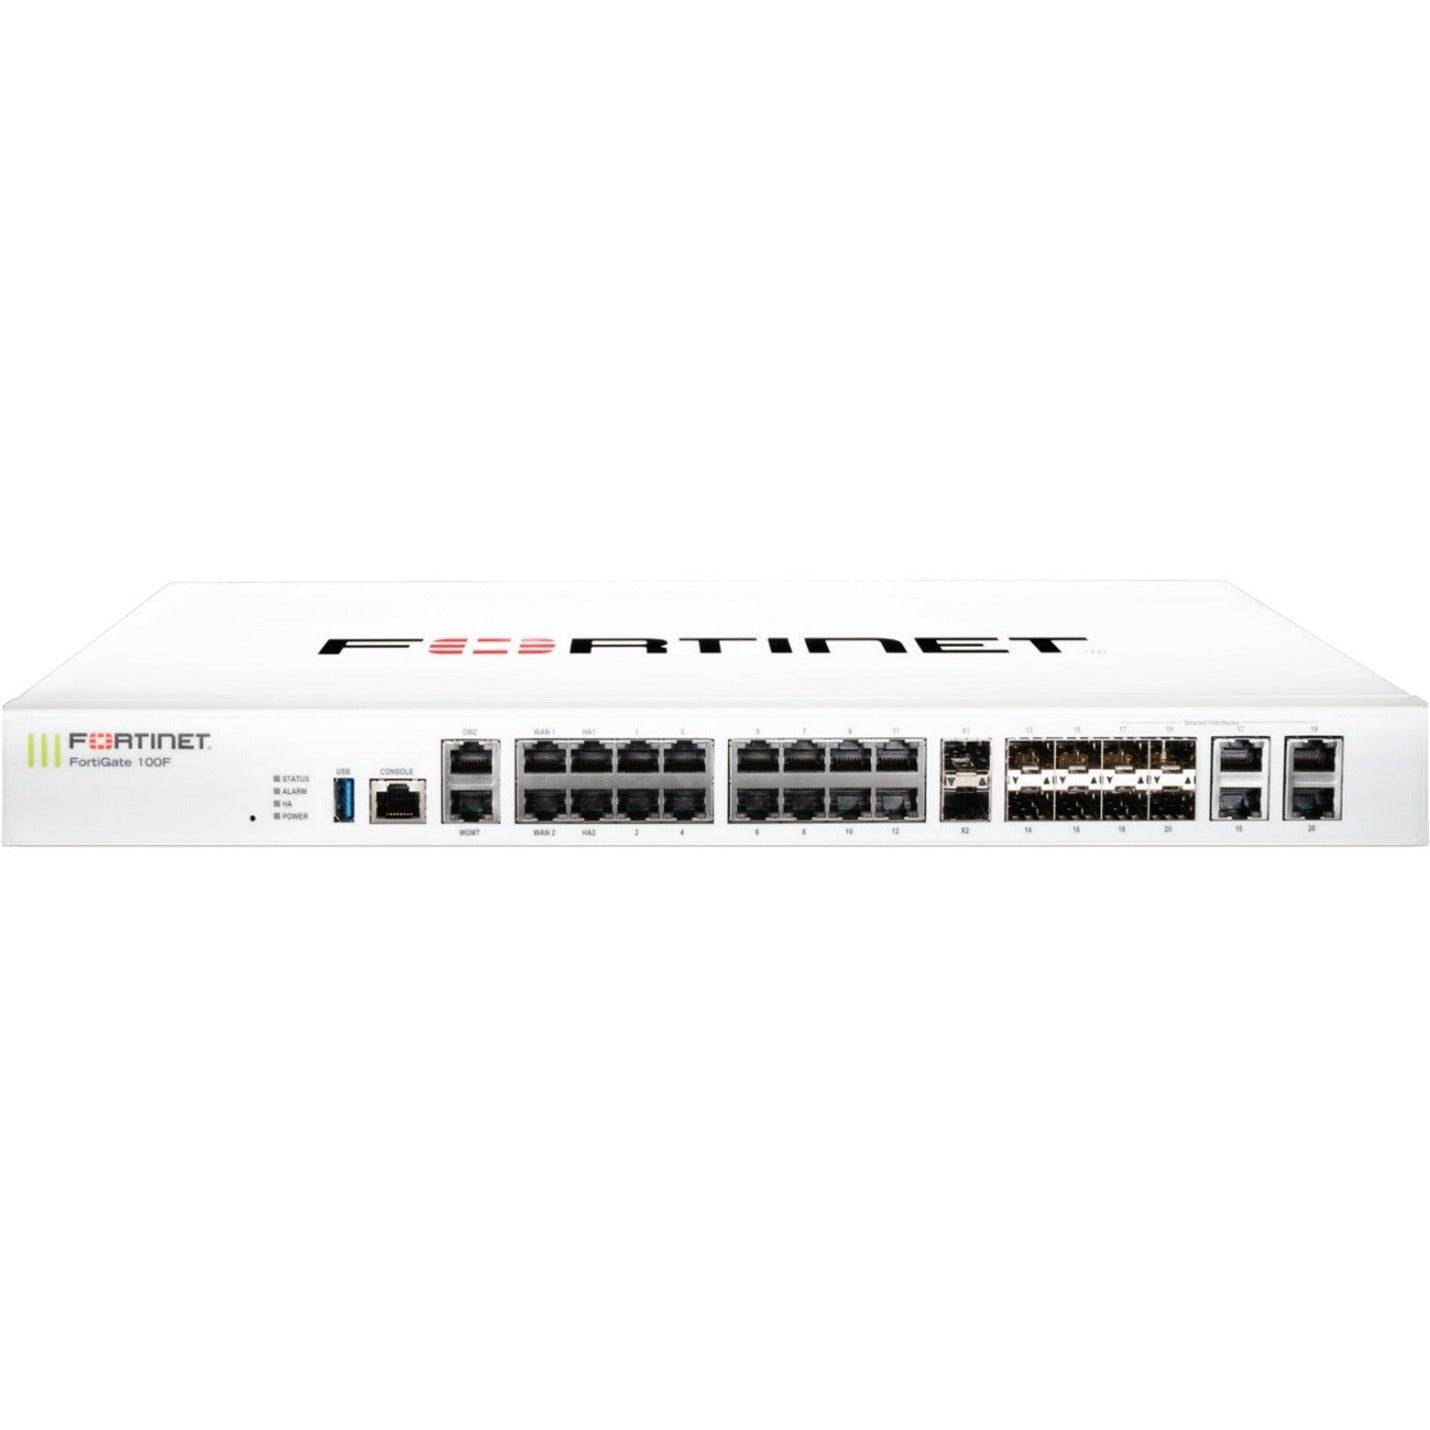 Fortinet FG-101F-BDL-950-12 FortiGate 101F Network Security/Firewall Appliance, 10GBase-X, 500 VPN Supported, 22 Ports